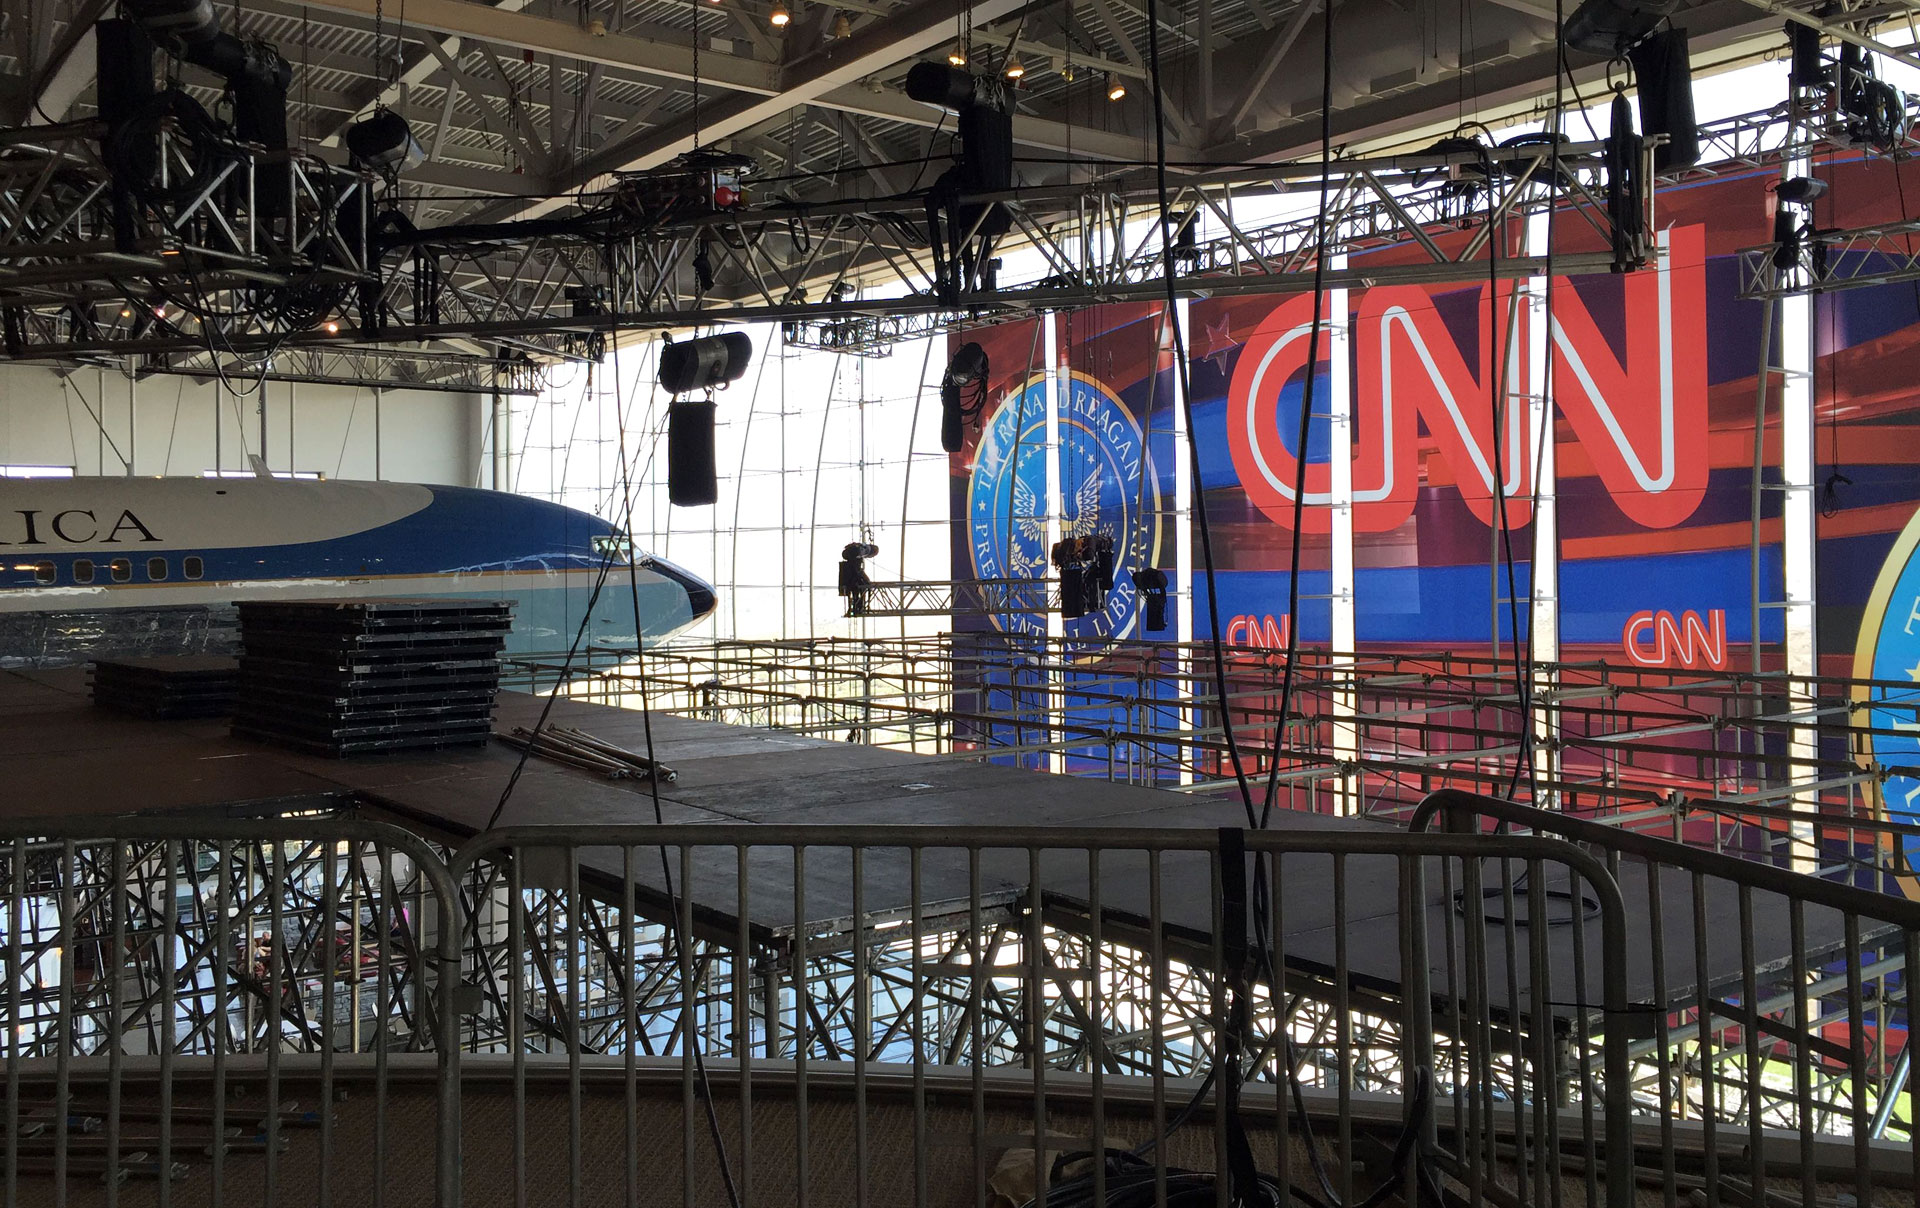 Scaffolding goes up at the Reagan Library in Simi Valley, the site of the next GOP debate.